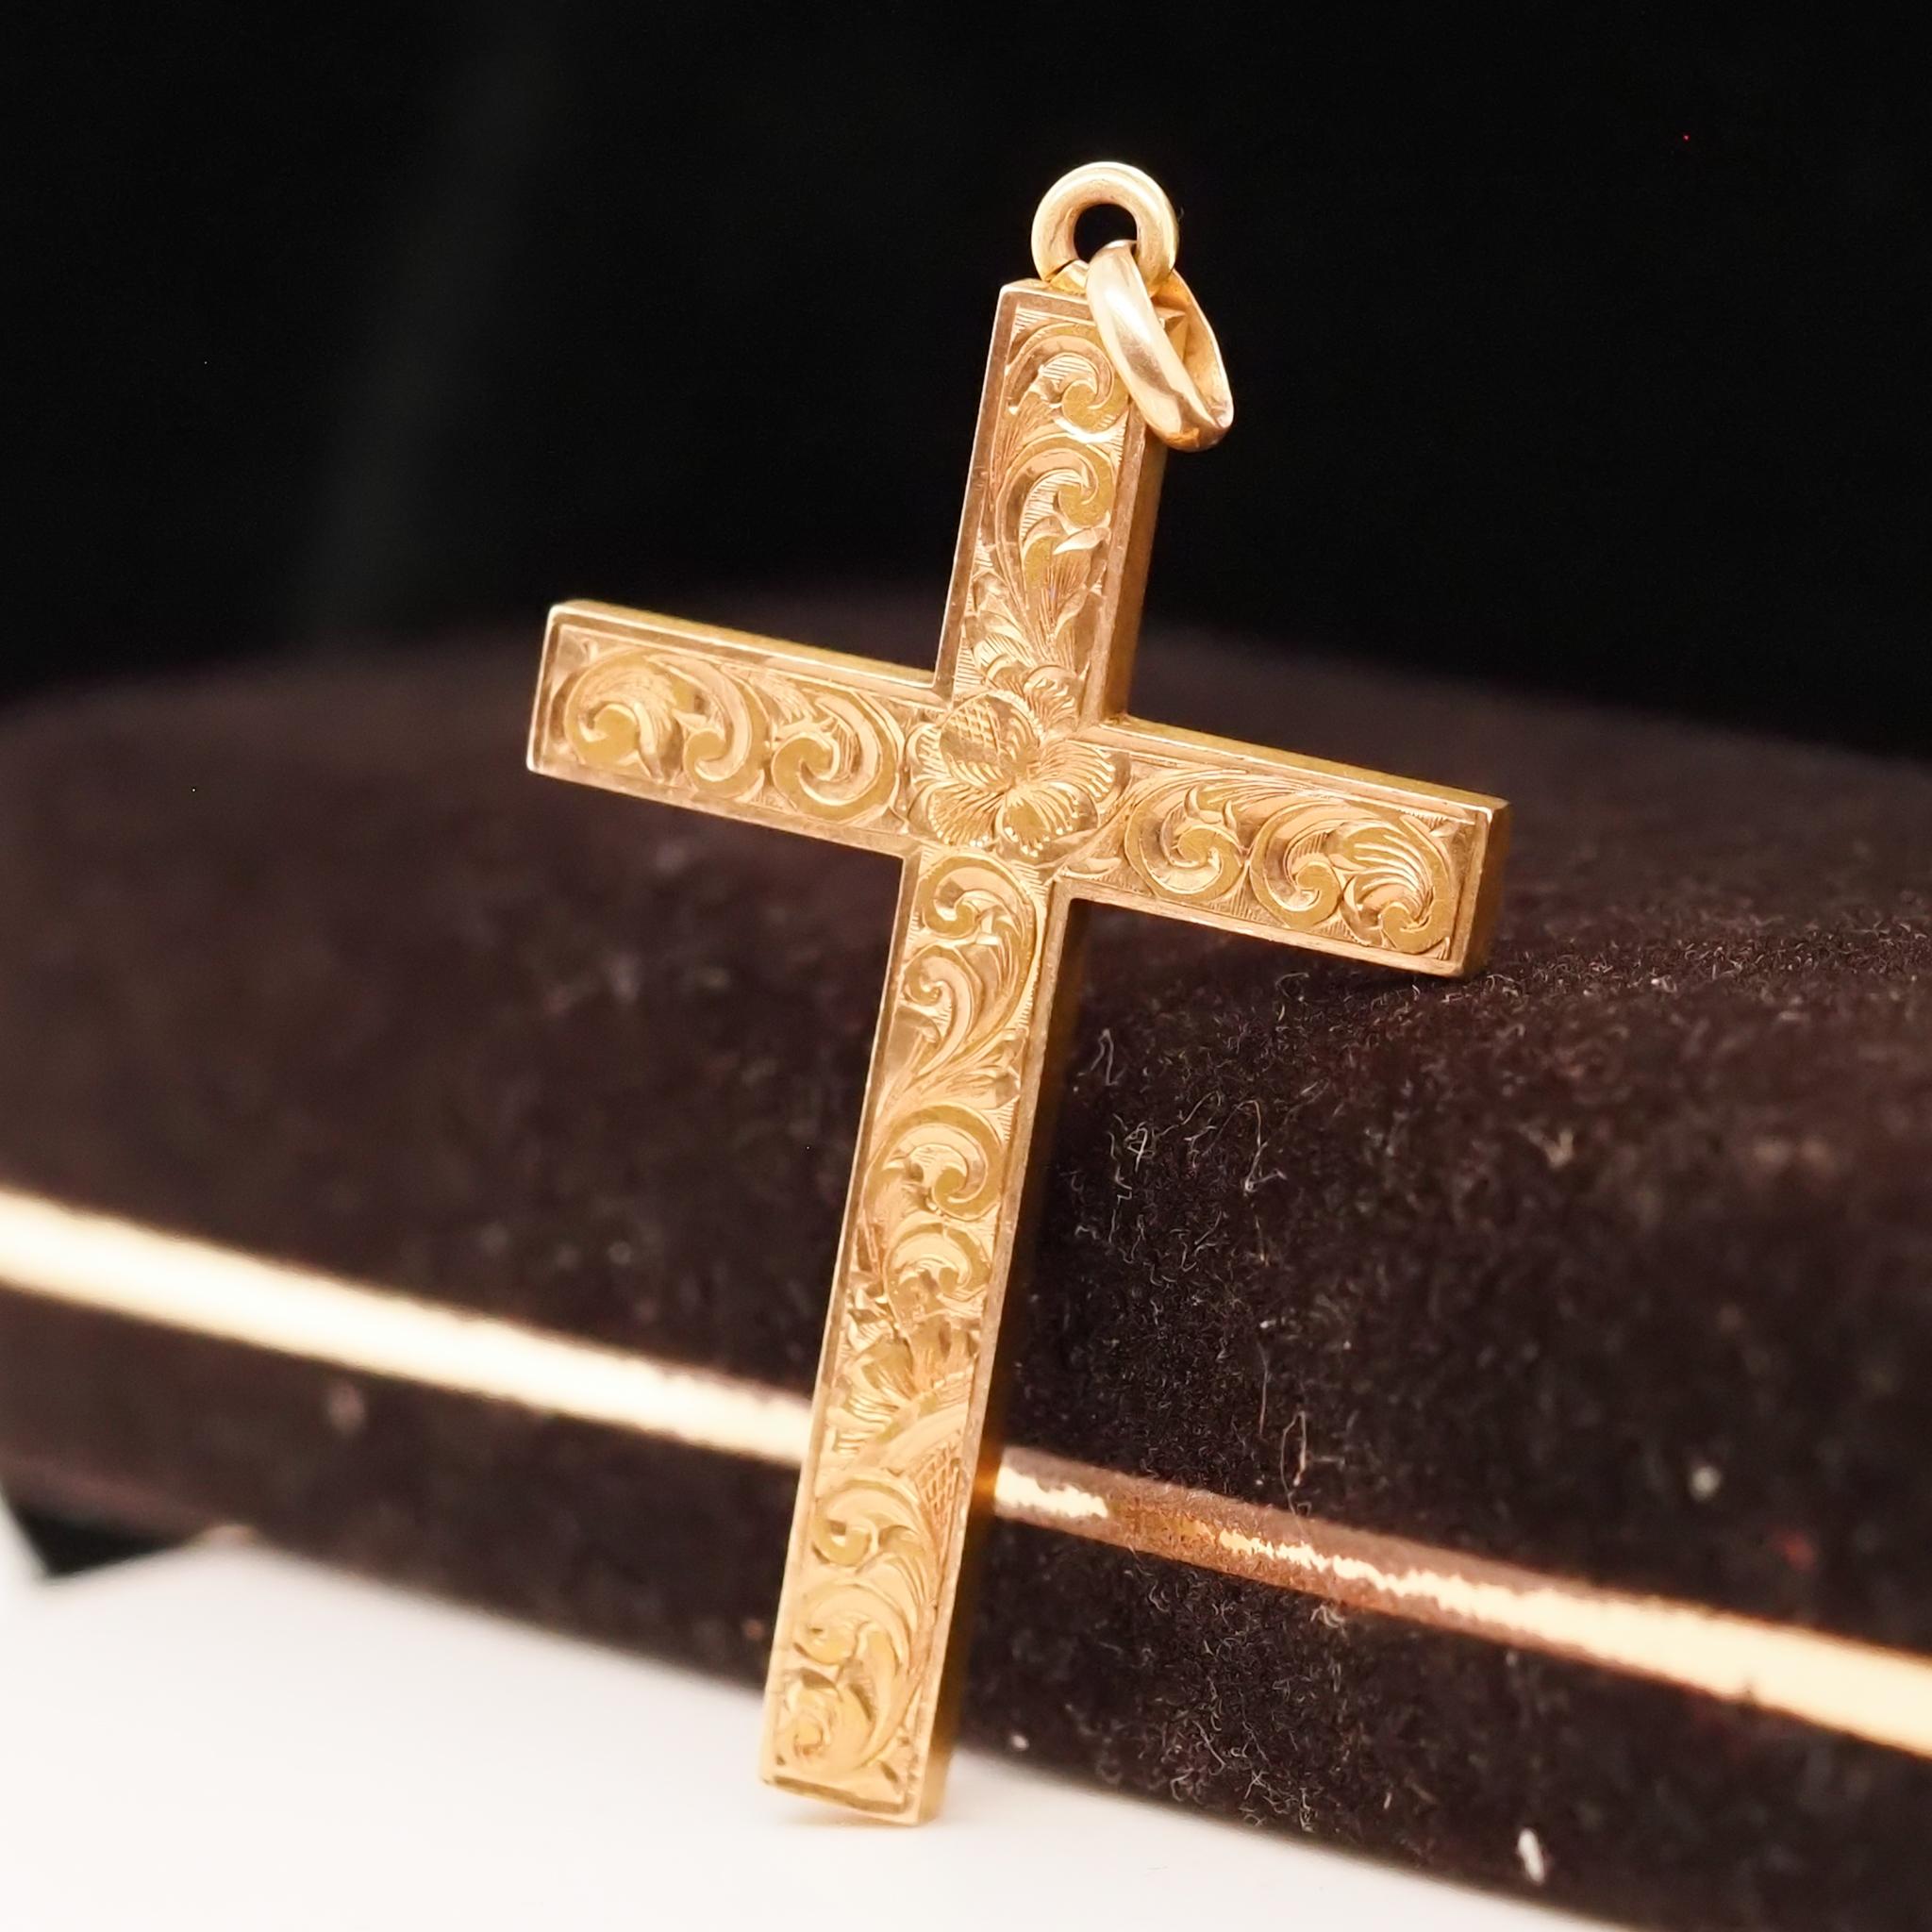 Year: 1908 (Engraved on the back)

Item Details:
Metal Type: 14K Yellow Gold [Hallmarked, and Tested]
Weight: 5.7 grams

Measurement: 2.2 inch long

Condition: Excellent

